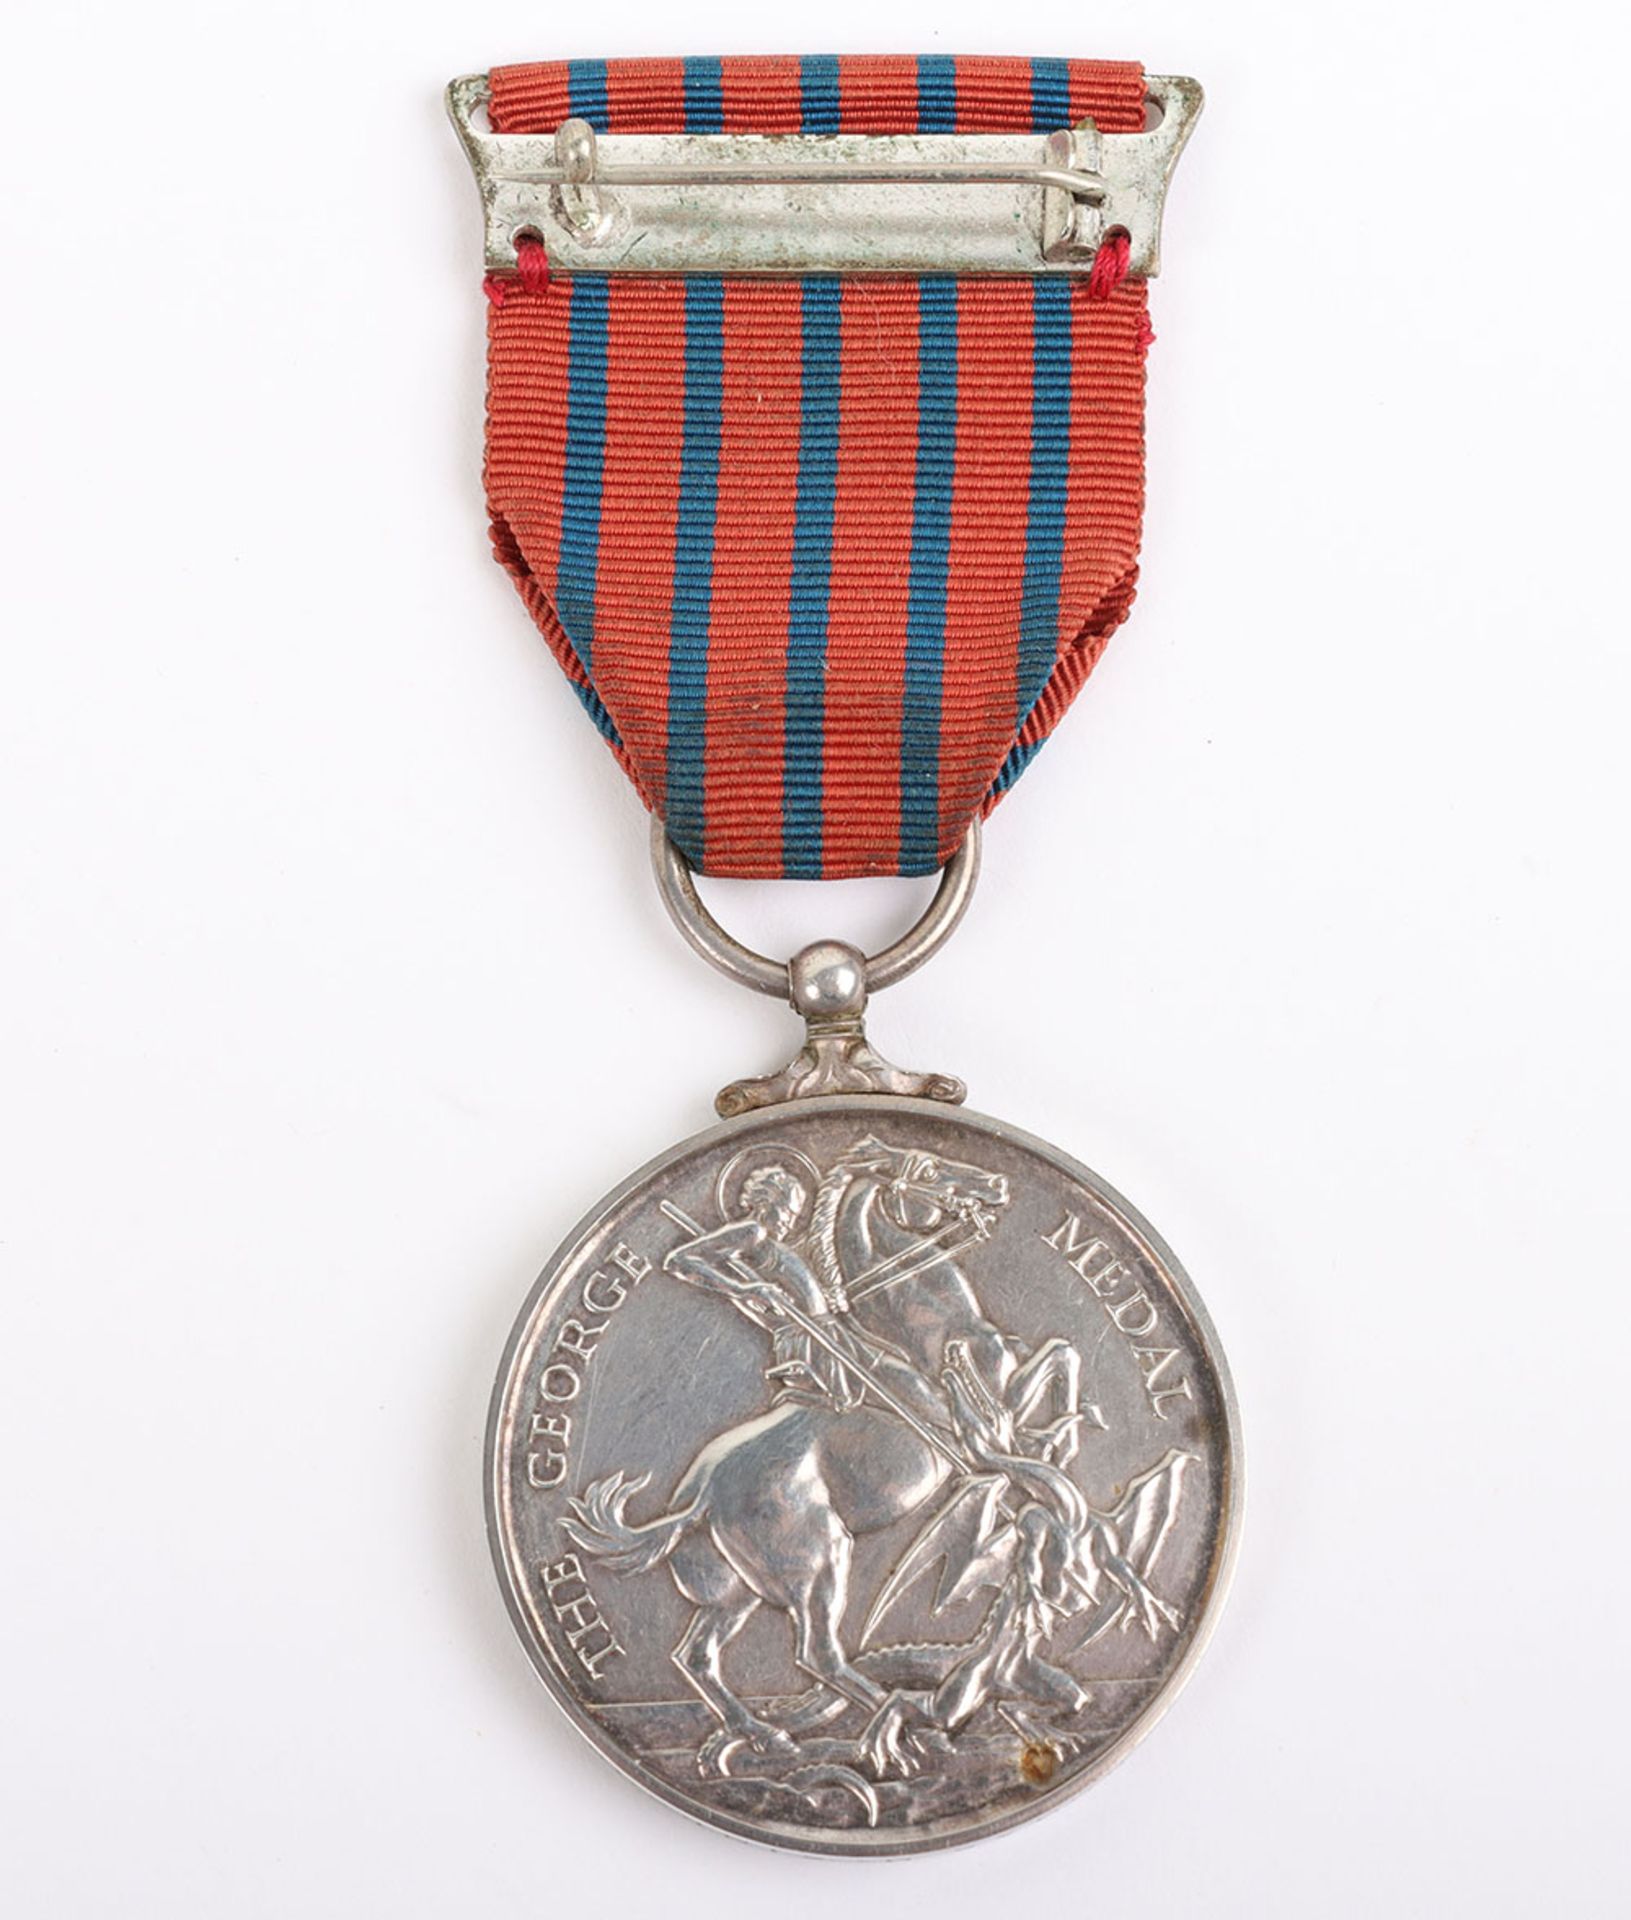 Second World War Birmingham Blitz Home Guard George Medal Awarded for Gallantry in Rescuing People T - Image 3 of 8